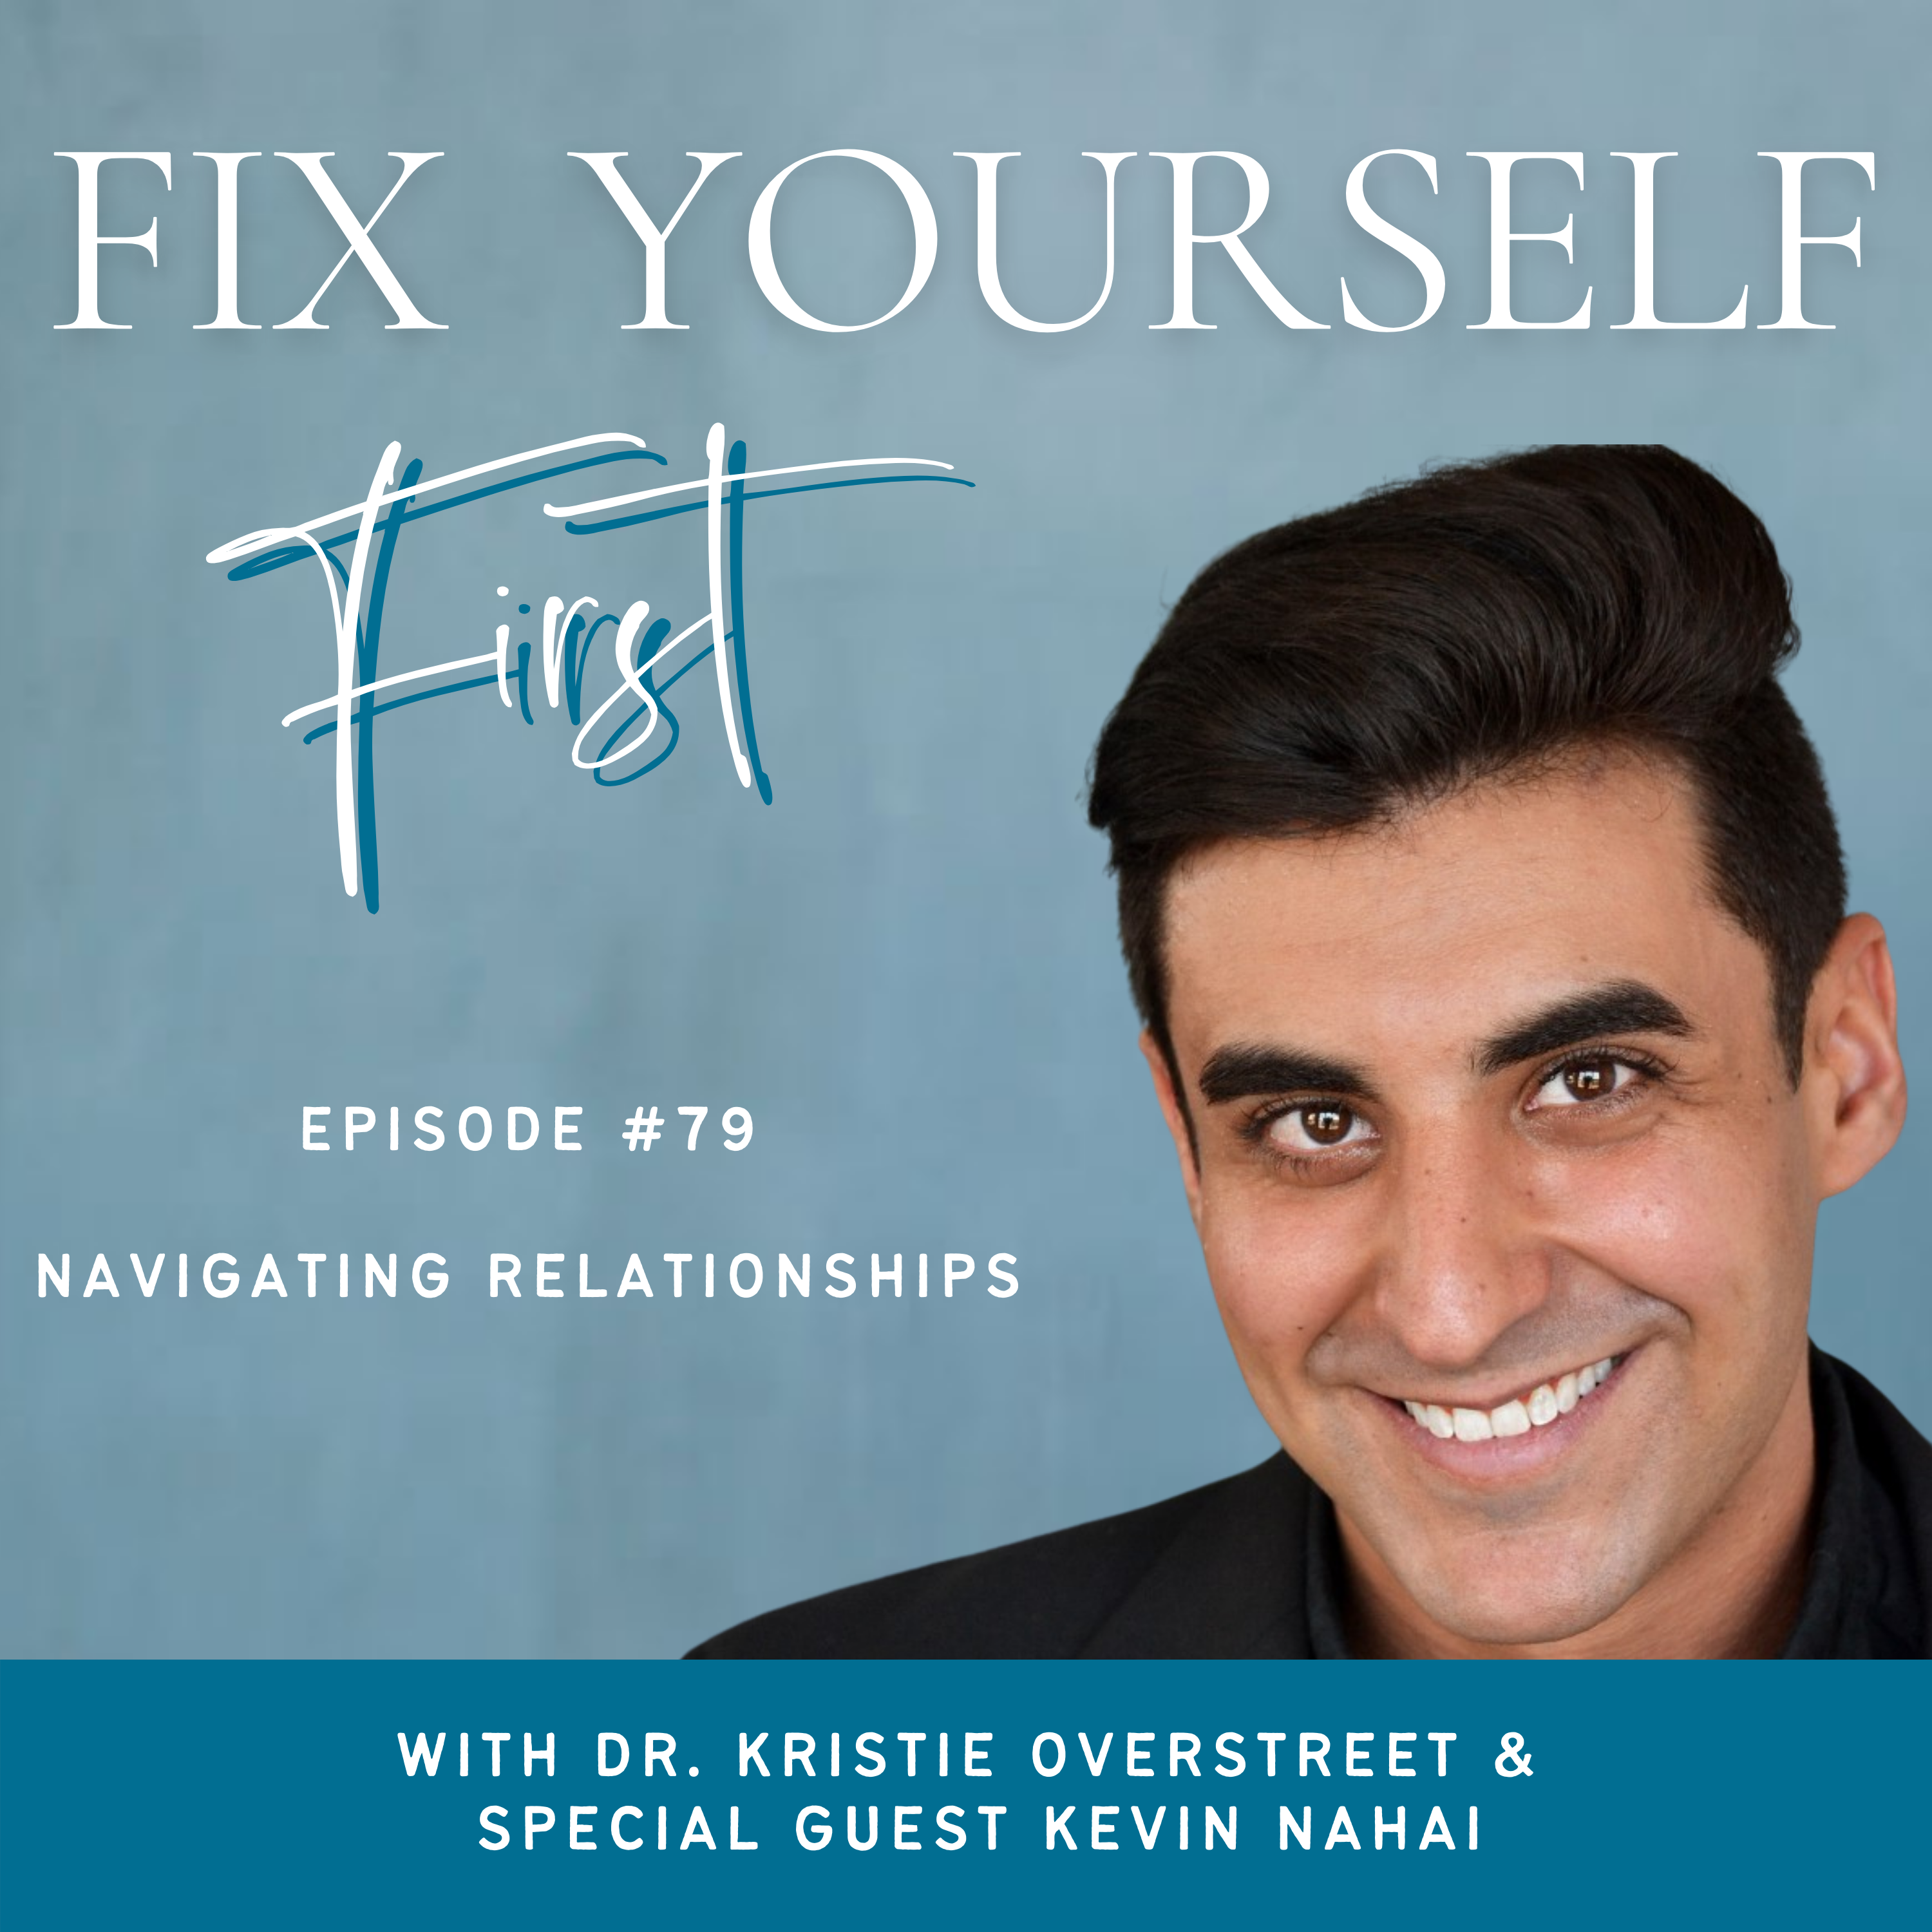 Fix Yourself First - Episode 79